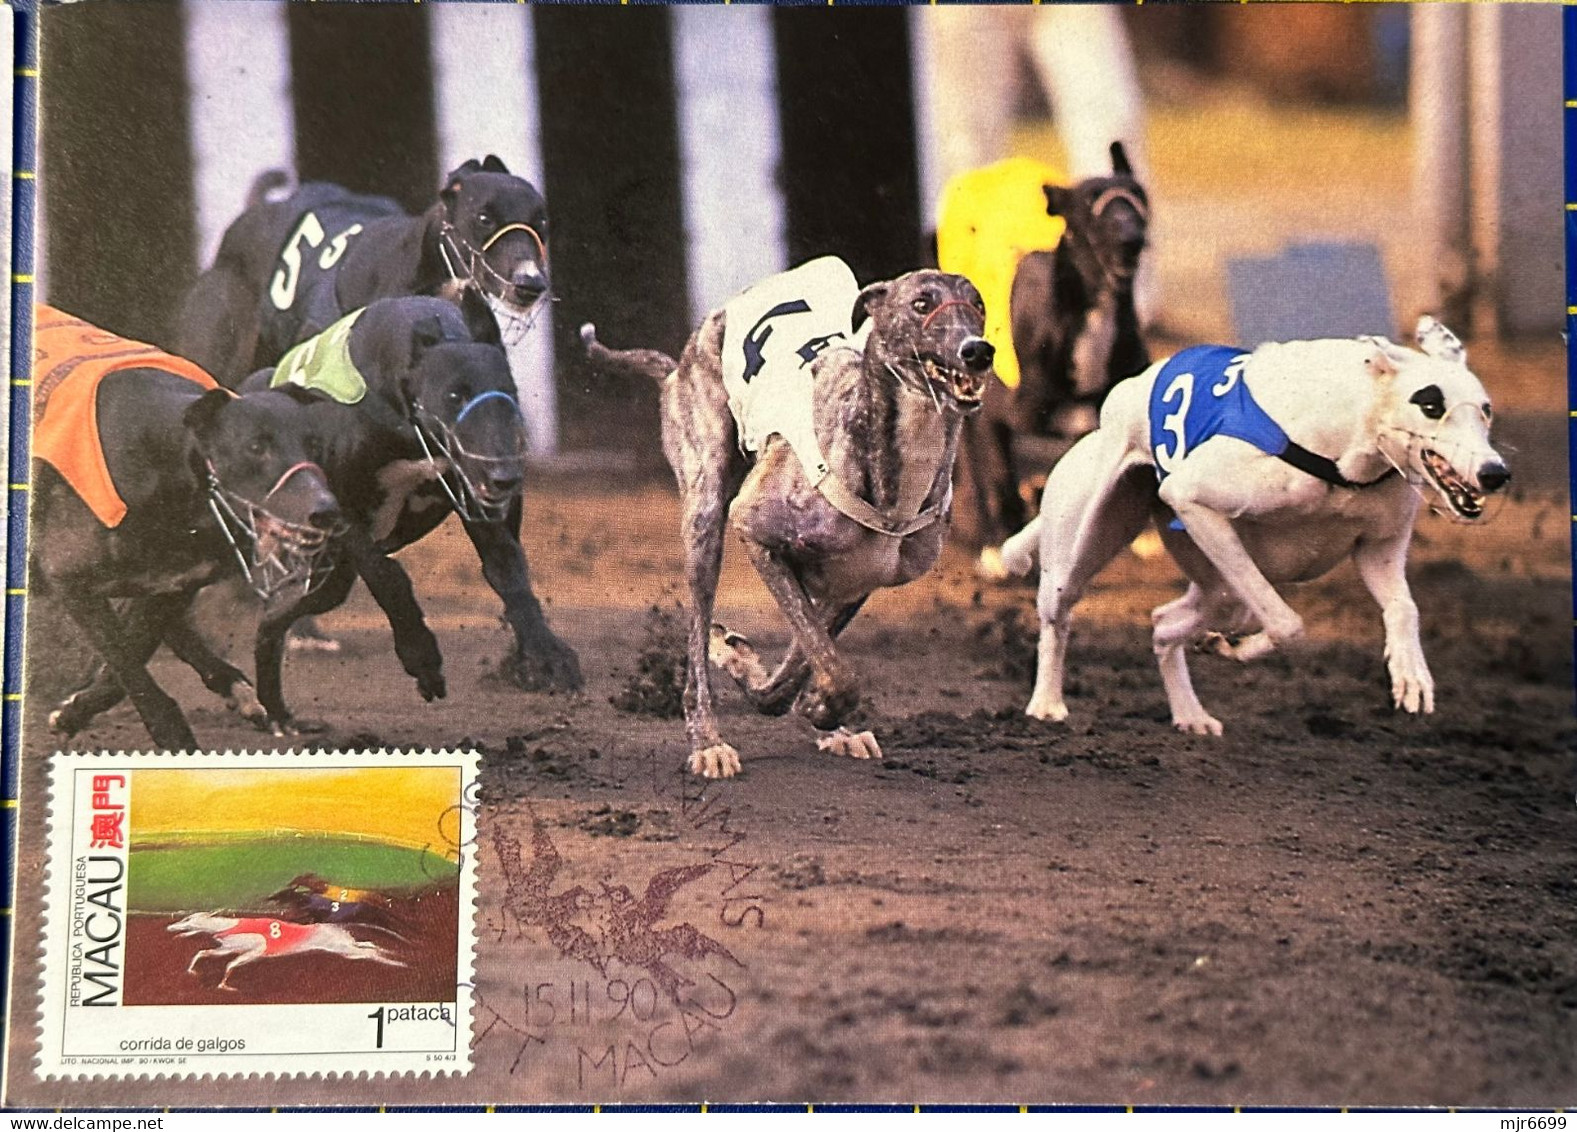 MACAU - 1990  GAMES WITH ANIMALS ISSUE SET OF 4 MAX CARD (CANCEL - FIRST DAY) - Maximum Cards